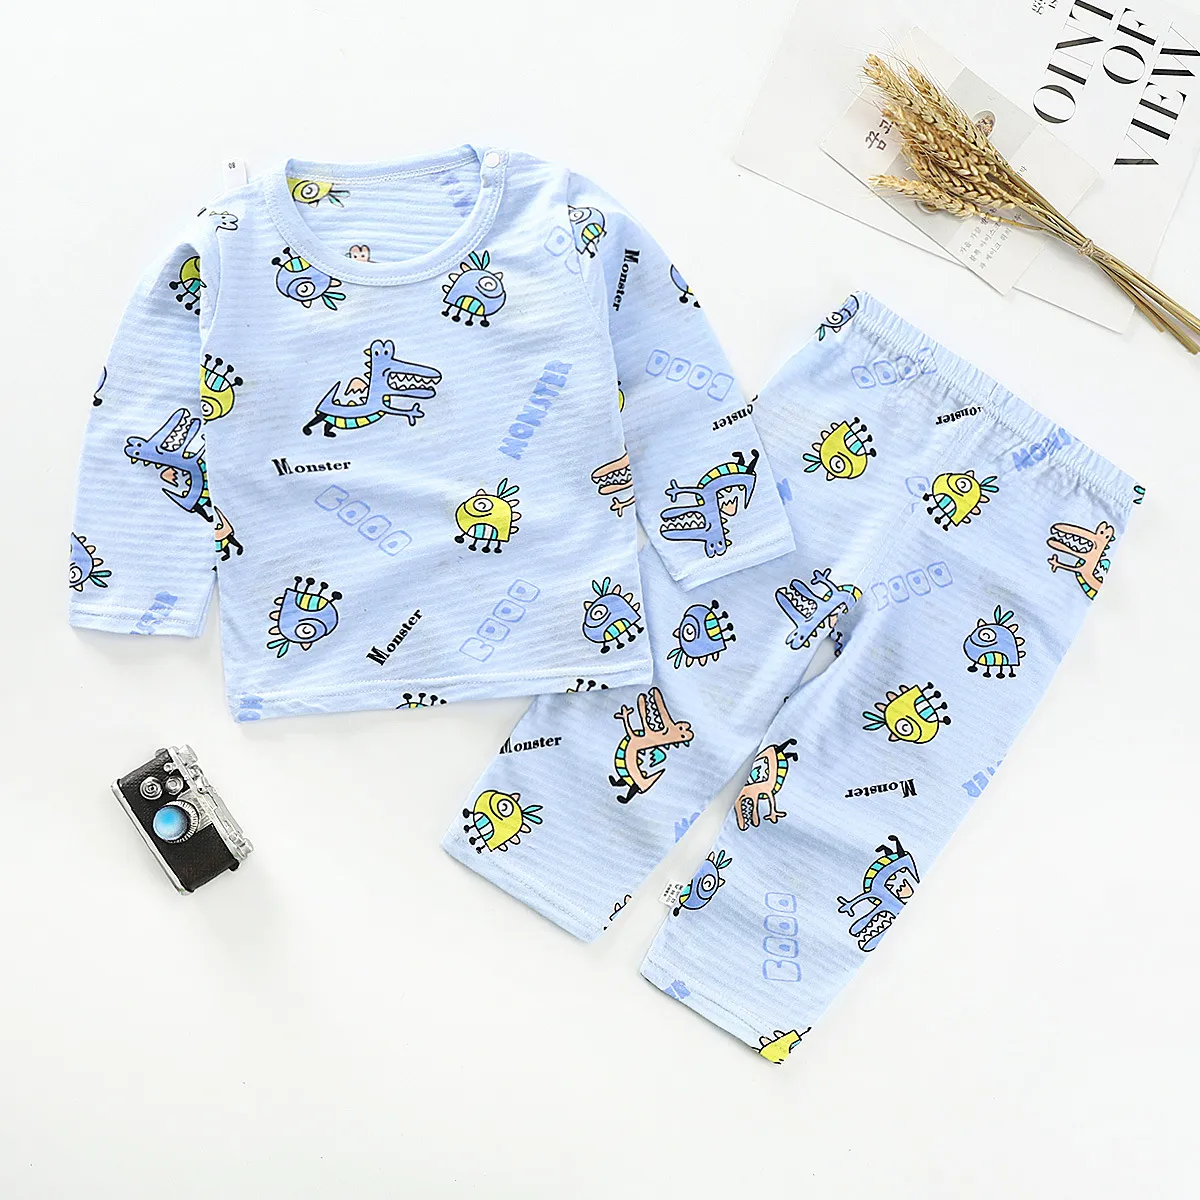 childrens home wear pajamas summer cotton underwear set hollow thin air conditioning clothing girls two-piece set